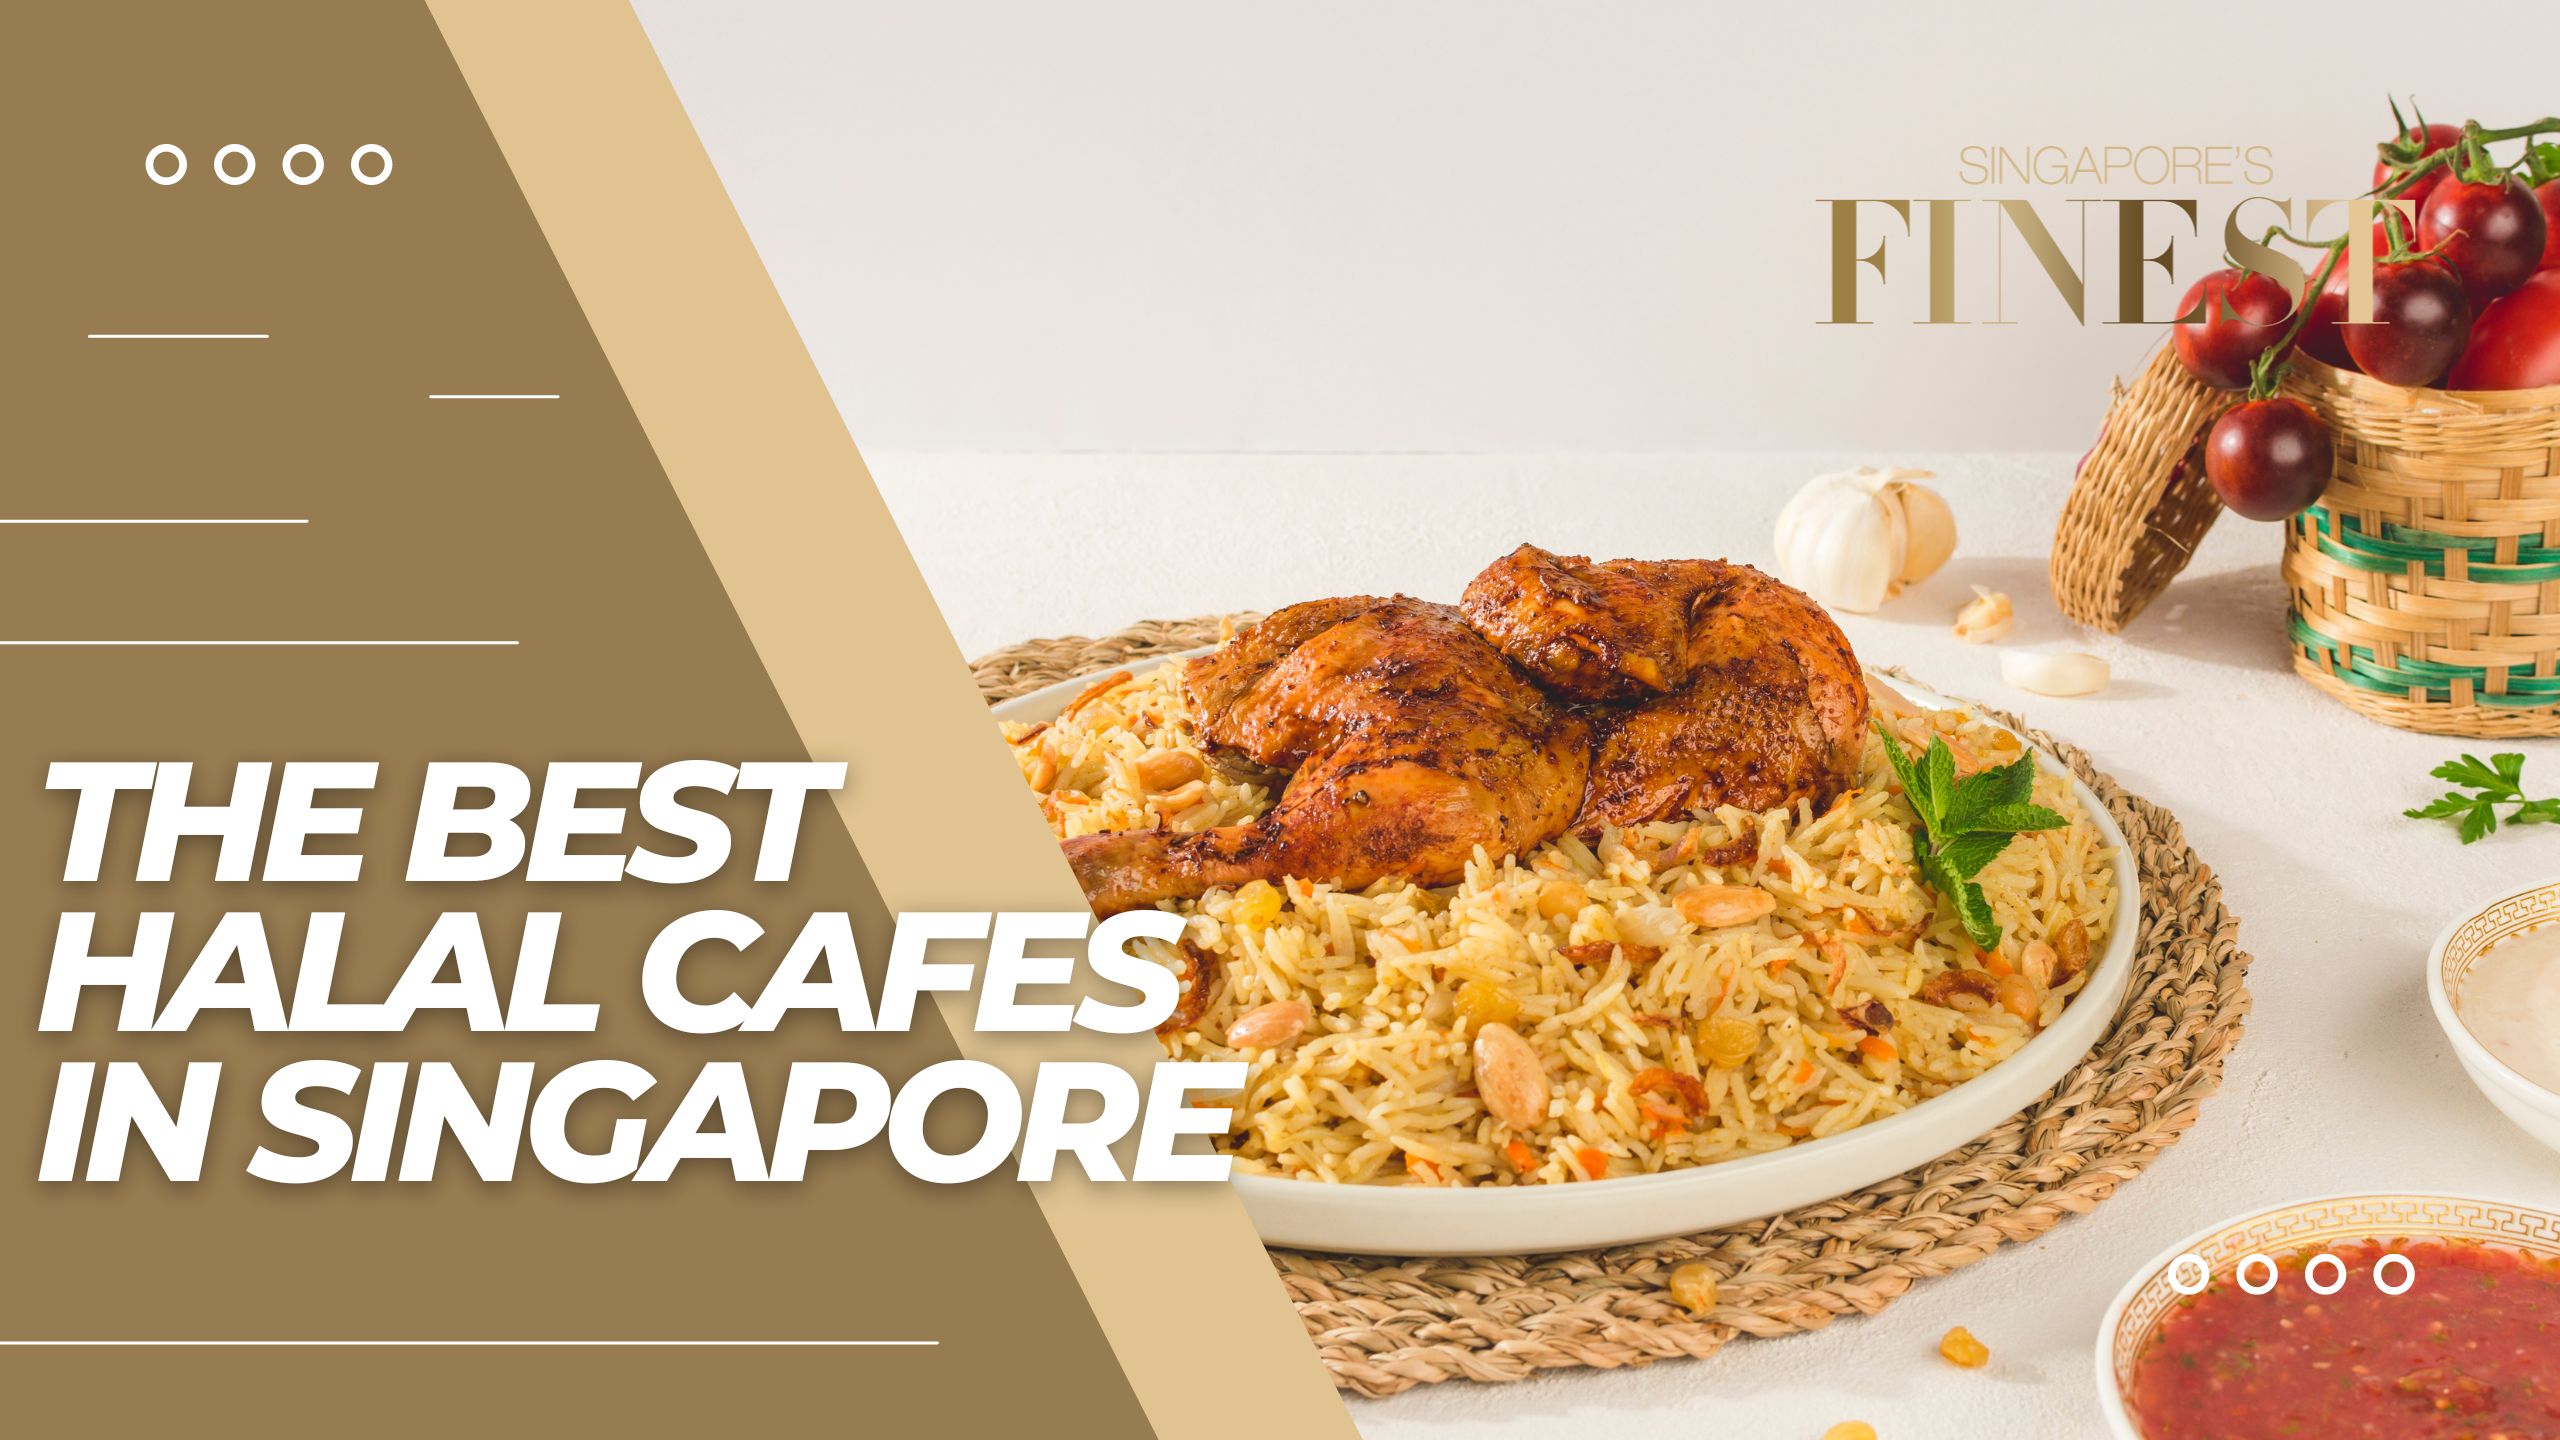 The Finest Halal Cafes in Singapore